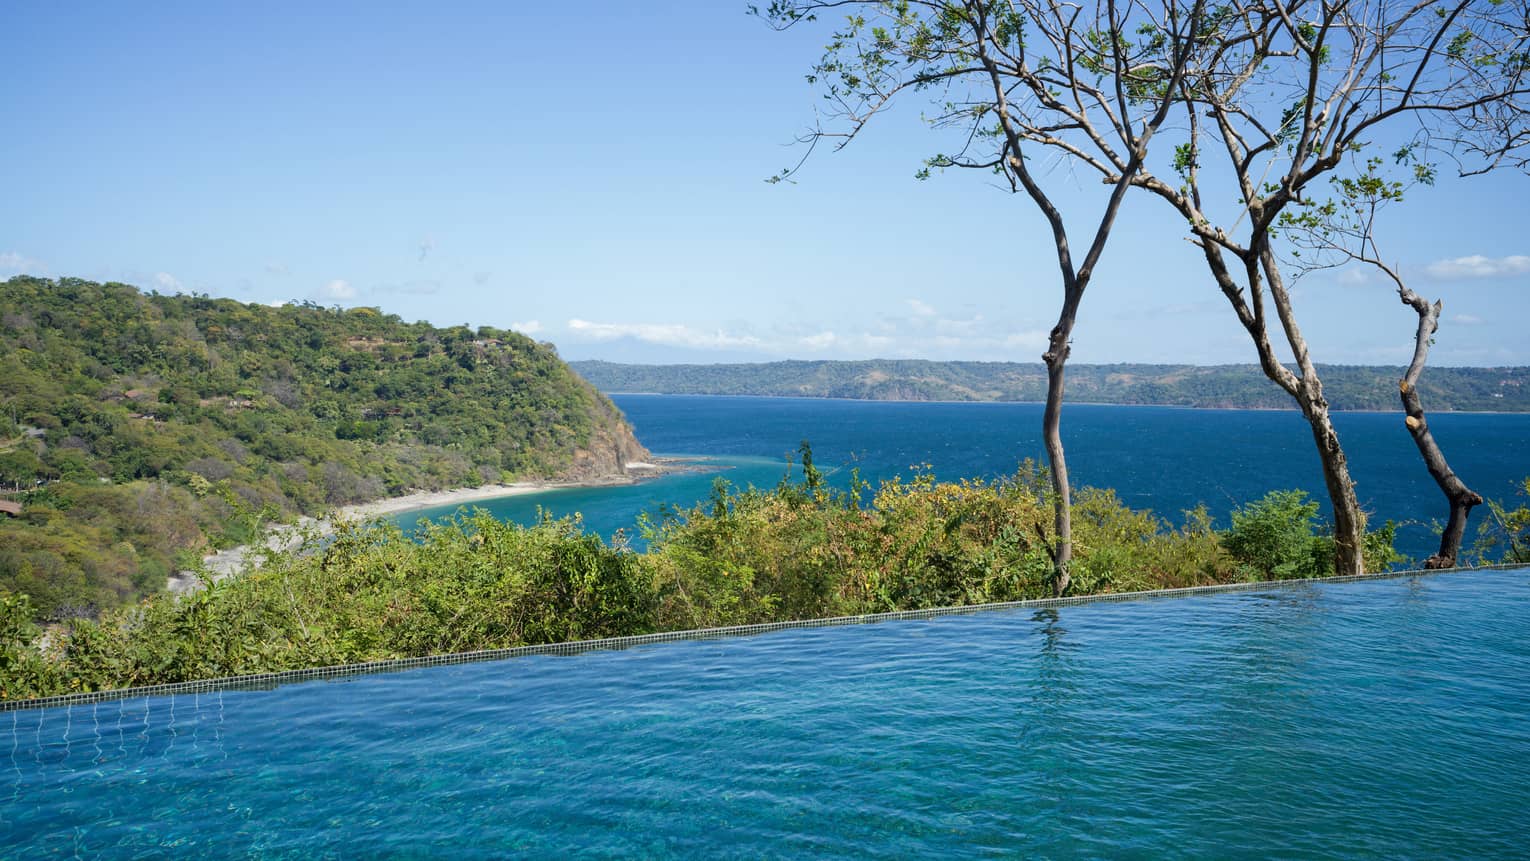 Infinity pool looking out to Costa Rican landscape and sea